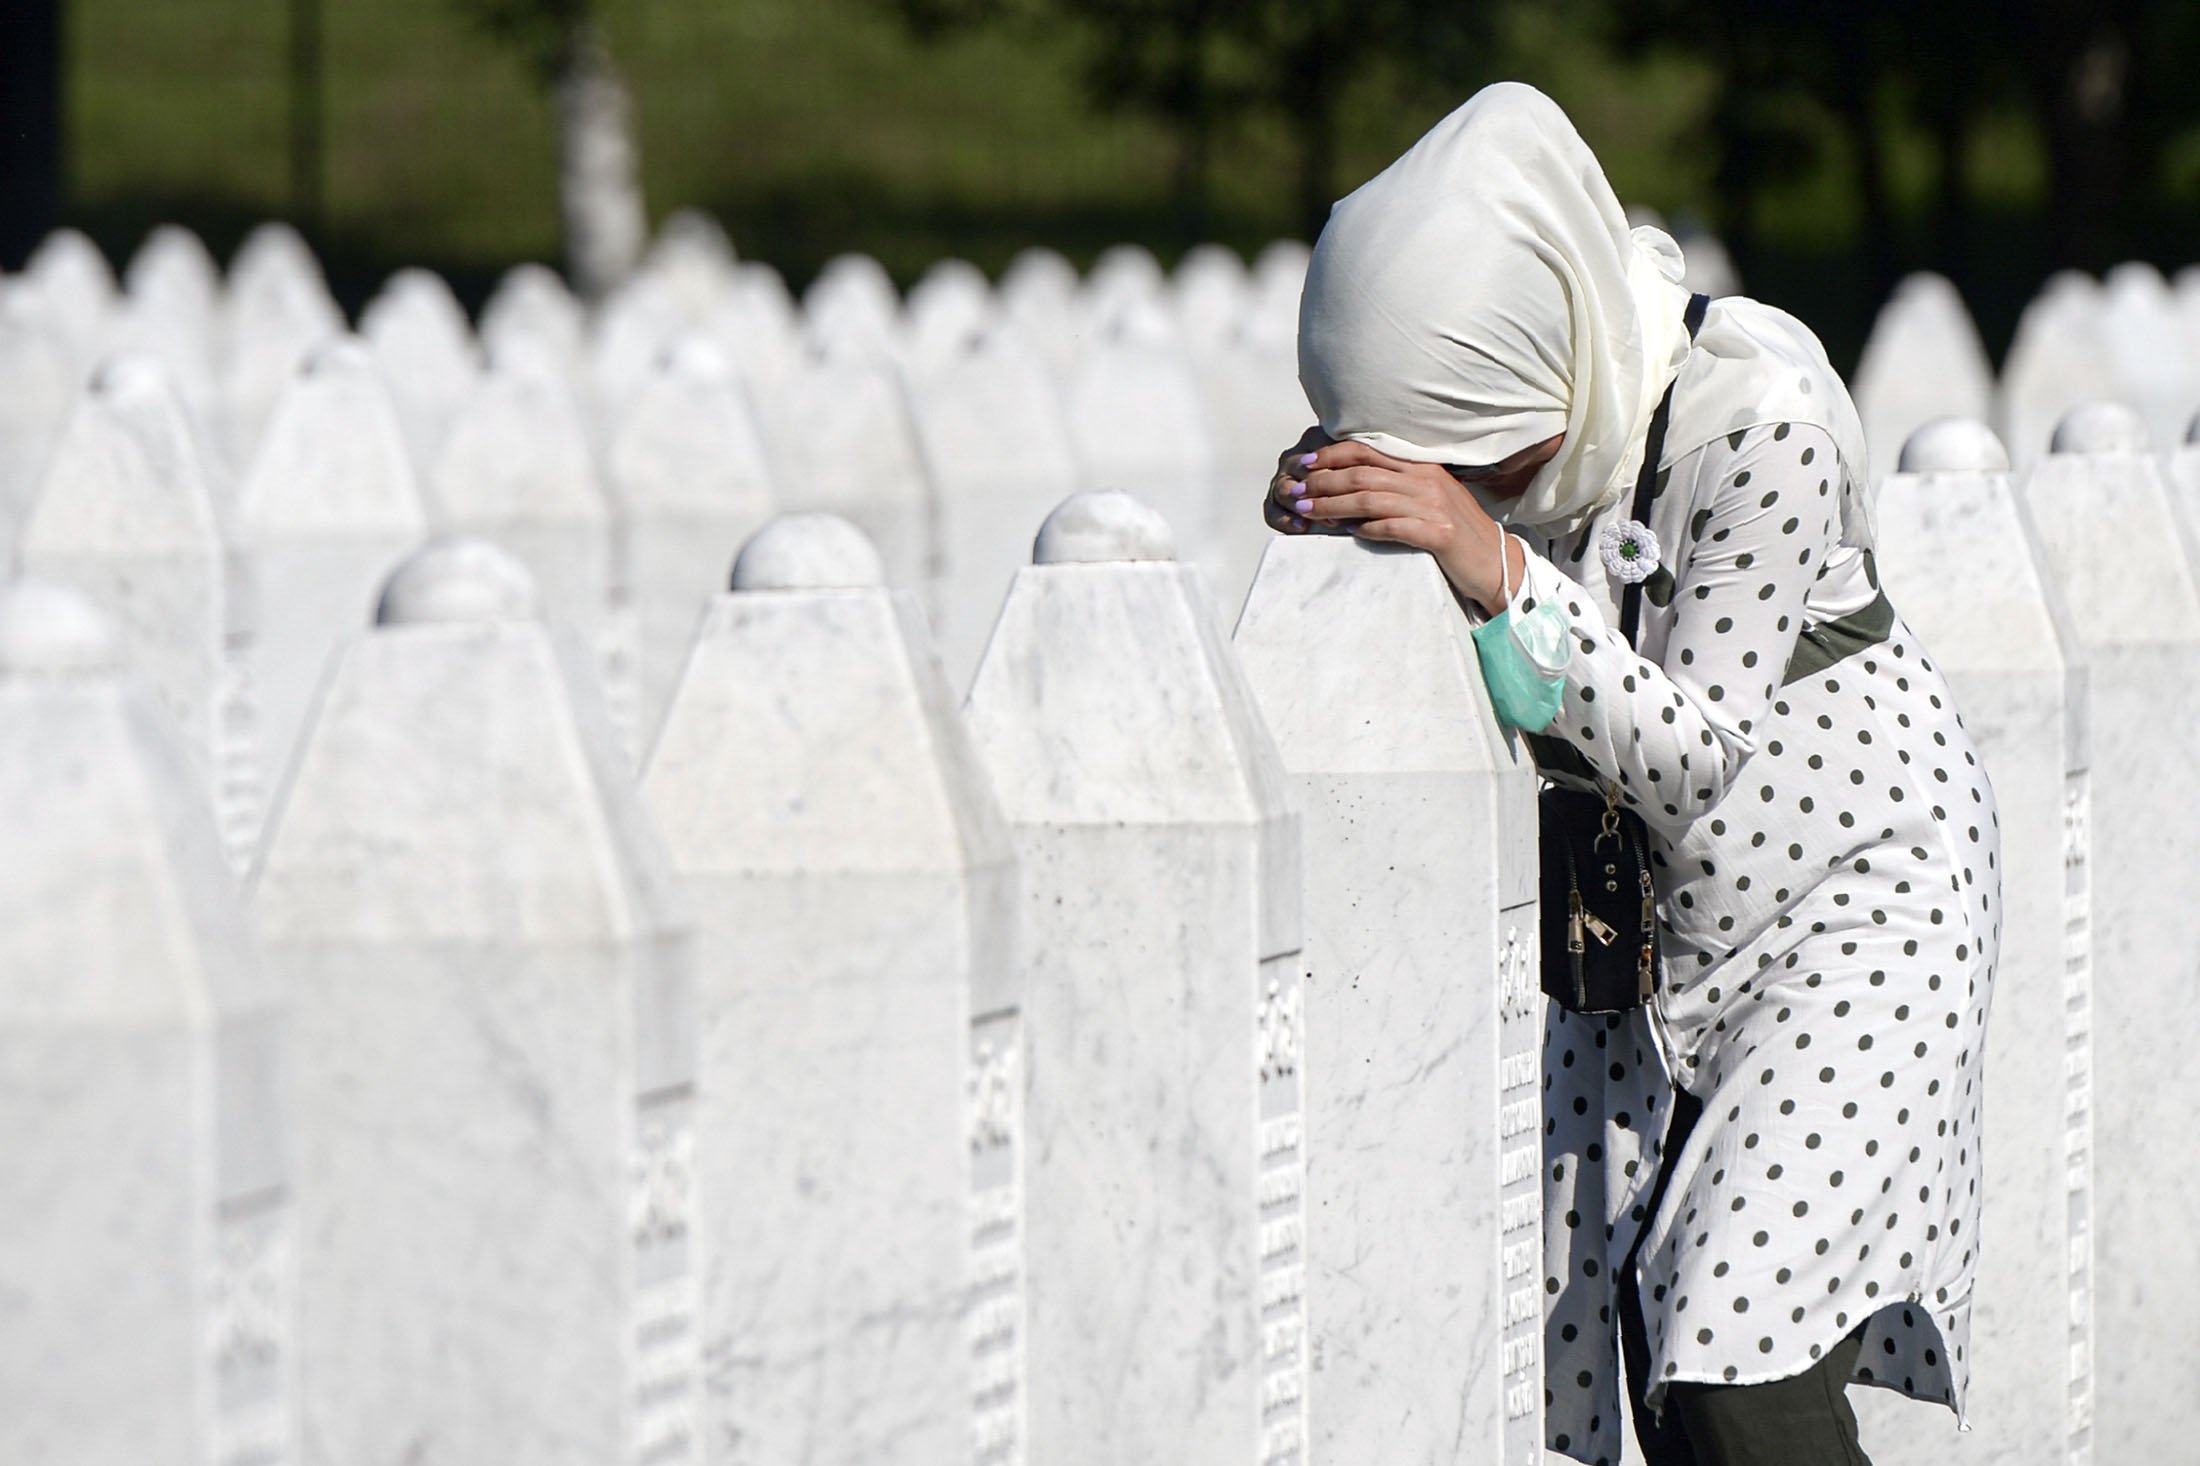 A look at Srebrenica genocide after 26 years | Daily Sabah